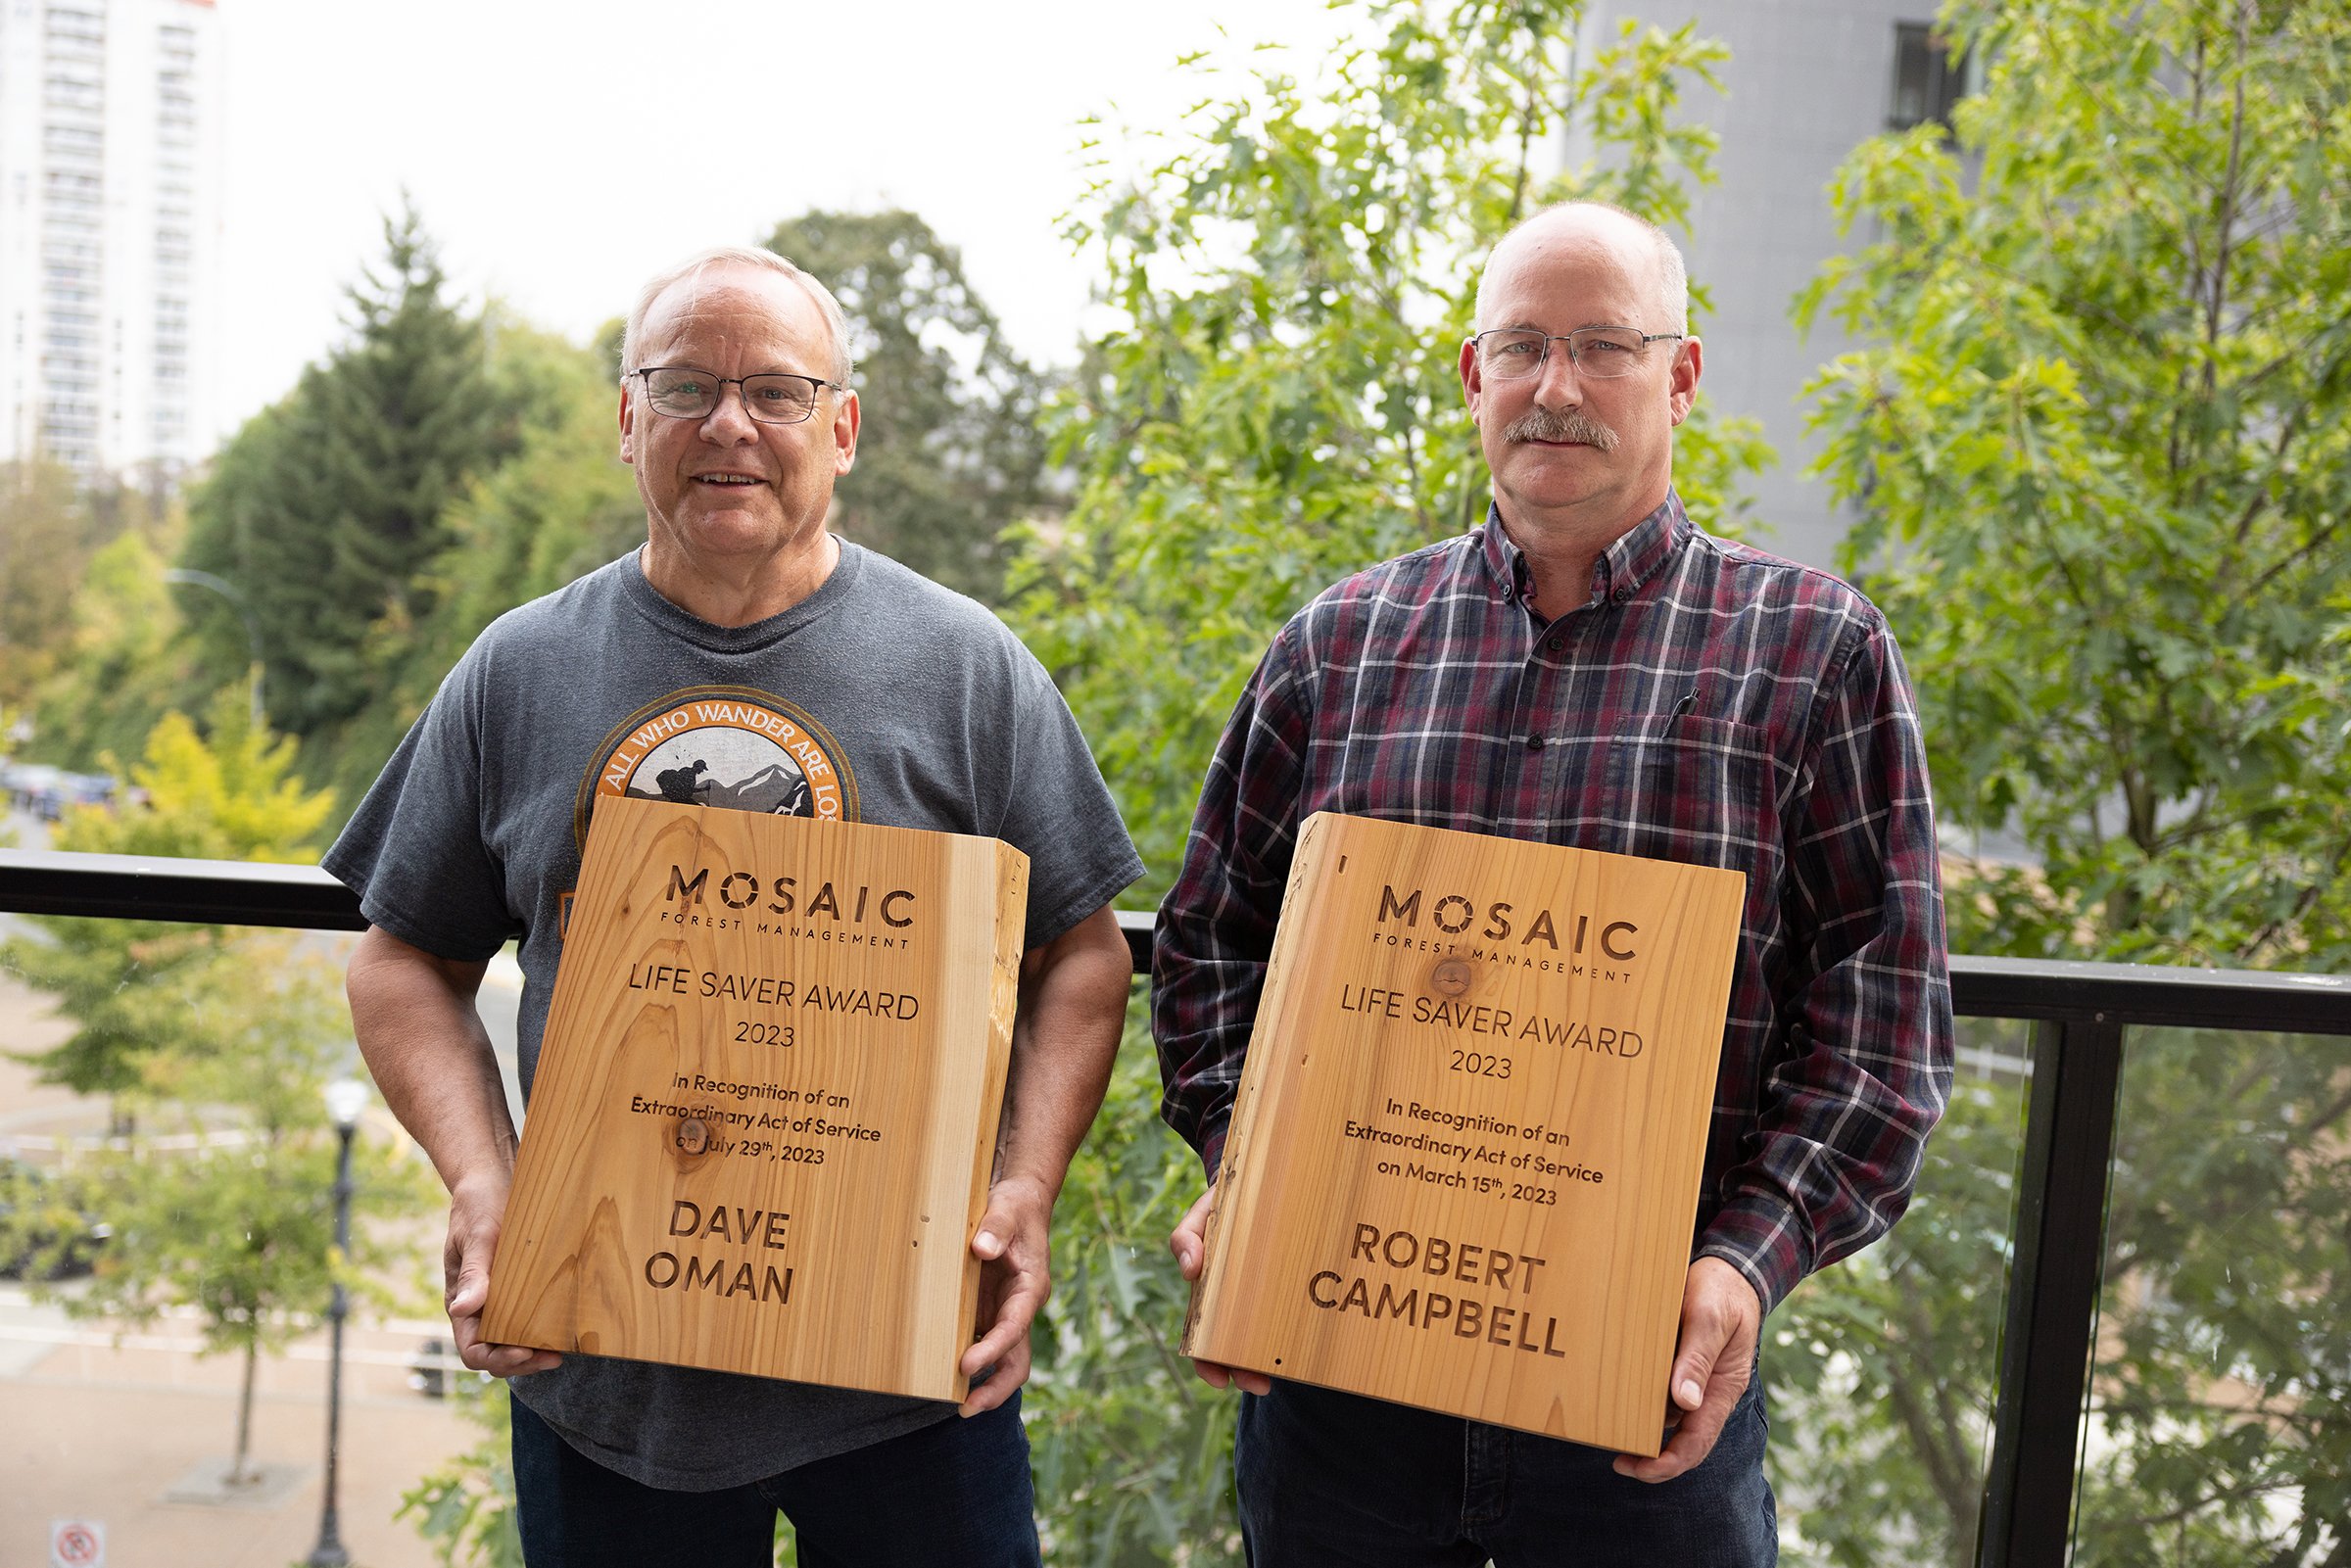 Life Saver Award Robert Campbell, SafetyNet Security, Campbell River  and Dave Oman, Mosaic Forest Management, Nanoose 